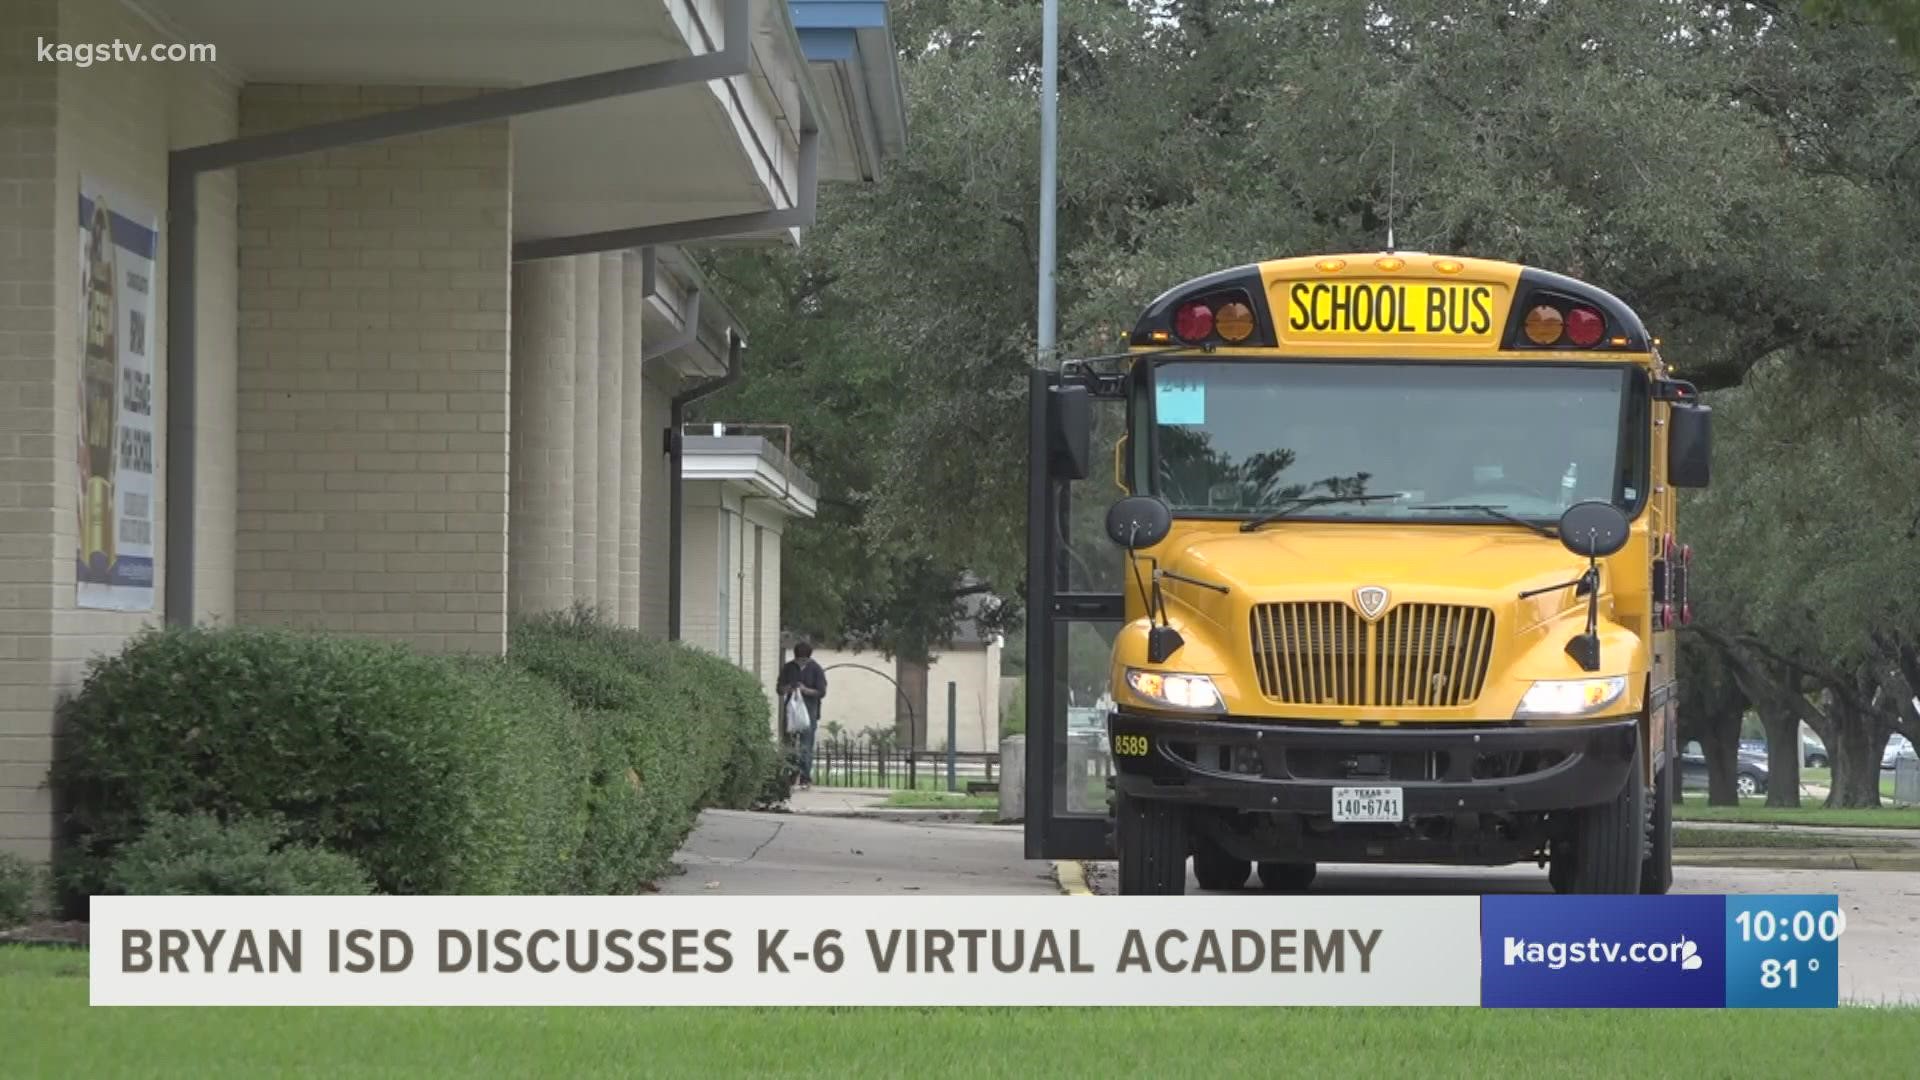 After parent concerns and funding approvals, Bryan ISD is considering a 'virtual academy'